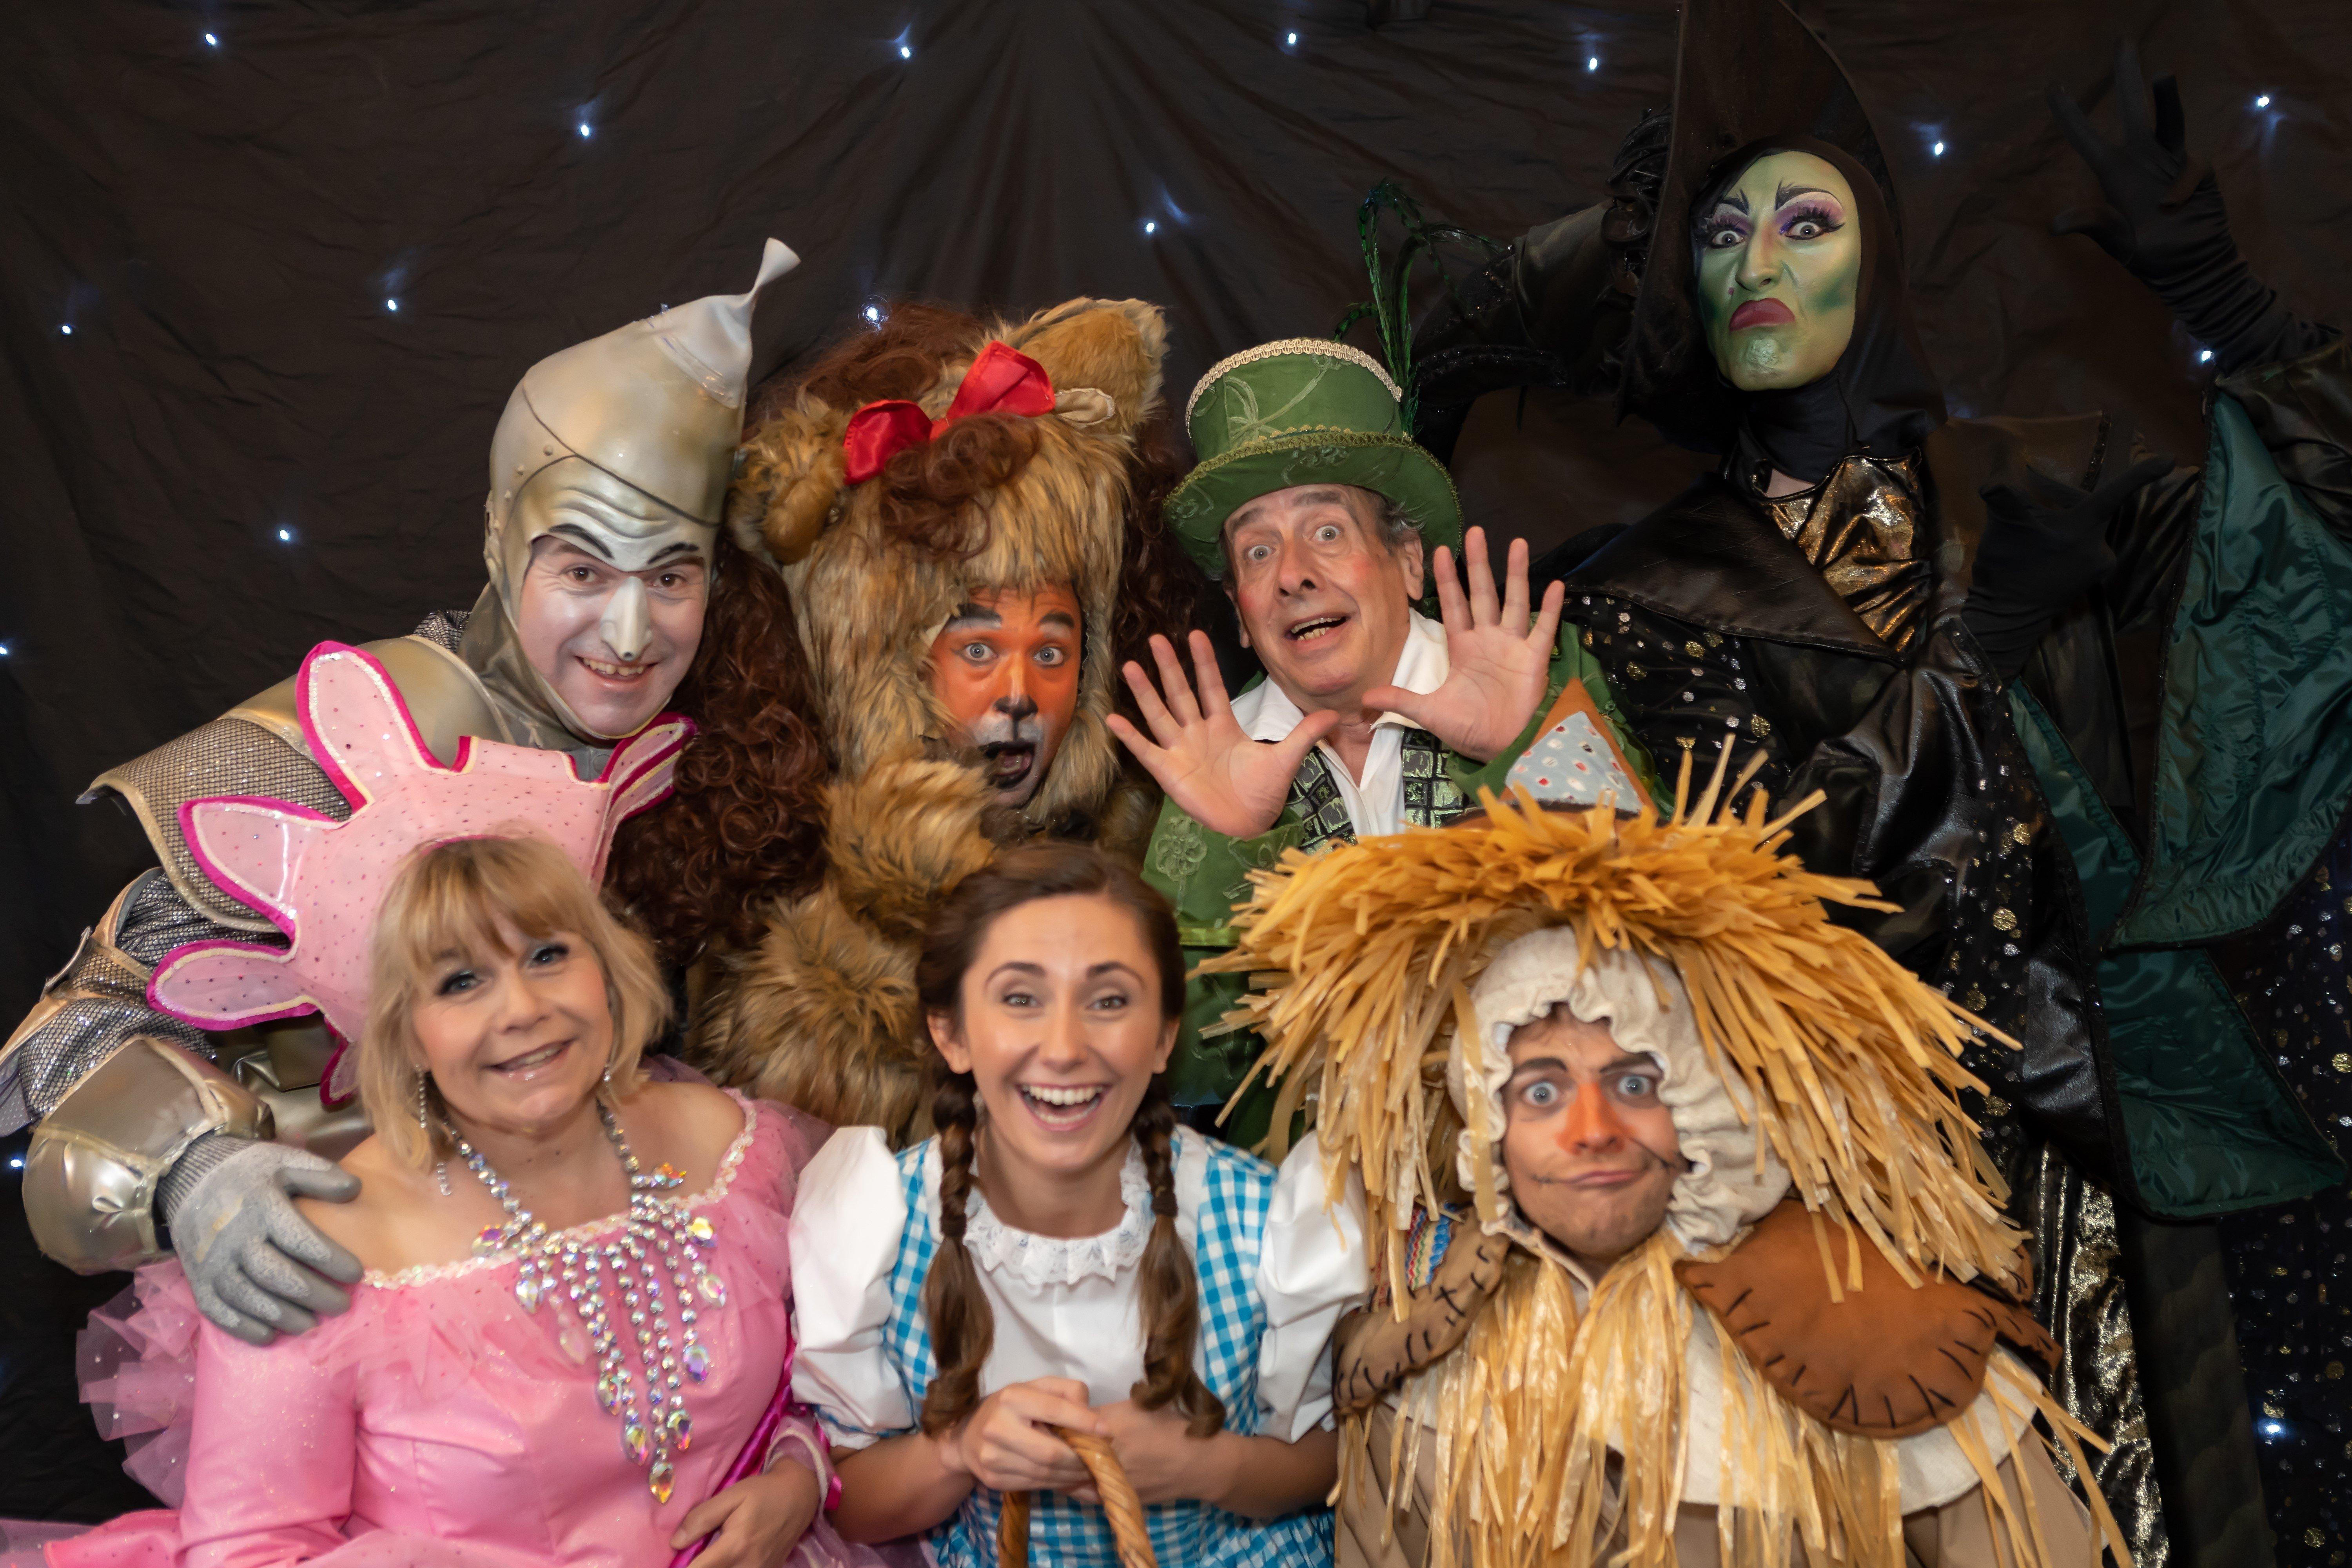 The Wizard of Oz is on at the Alexandra Theatre, Belmont Street, Bognor Regis from December 11 2019 to January 4 2020. Picture by youreventphotography.uk